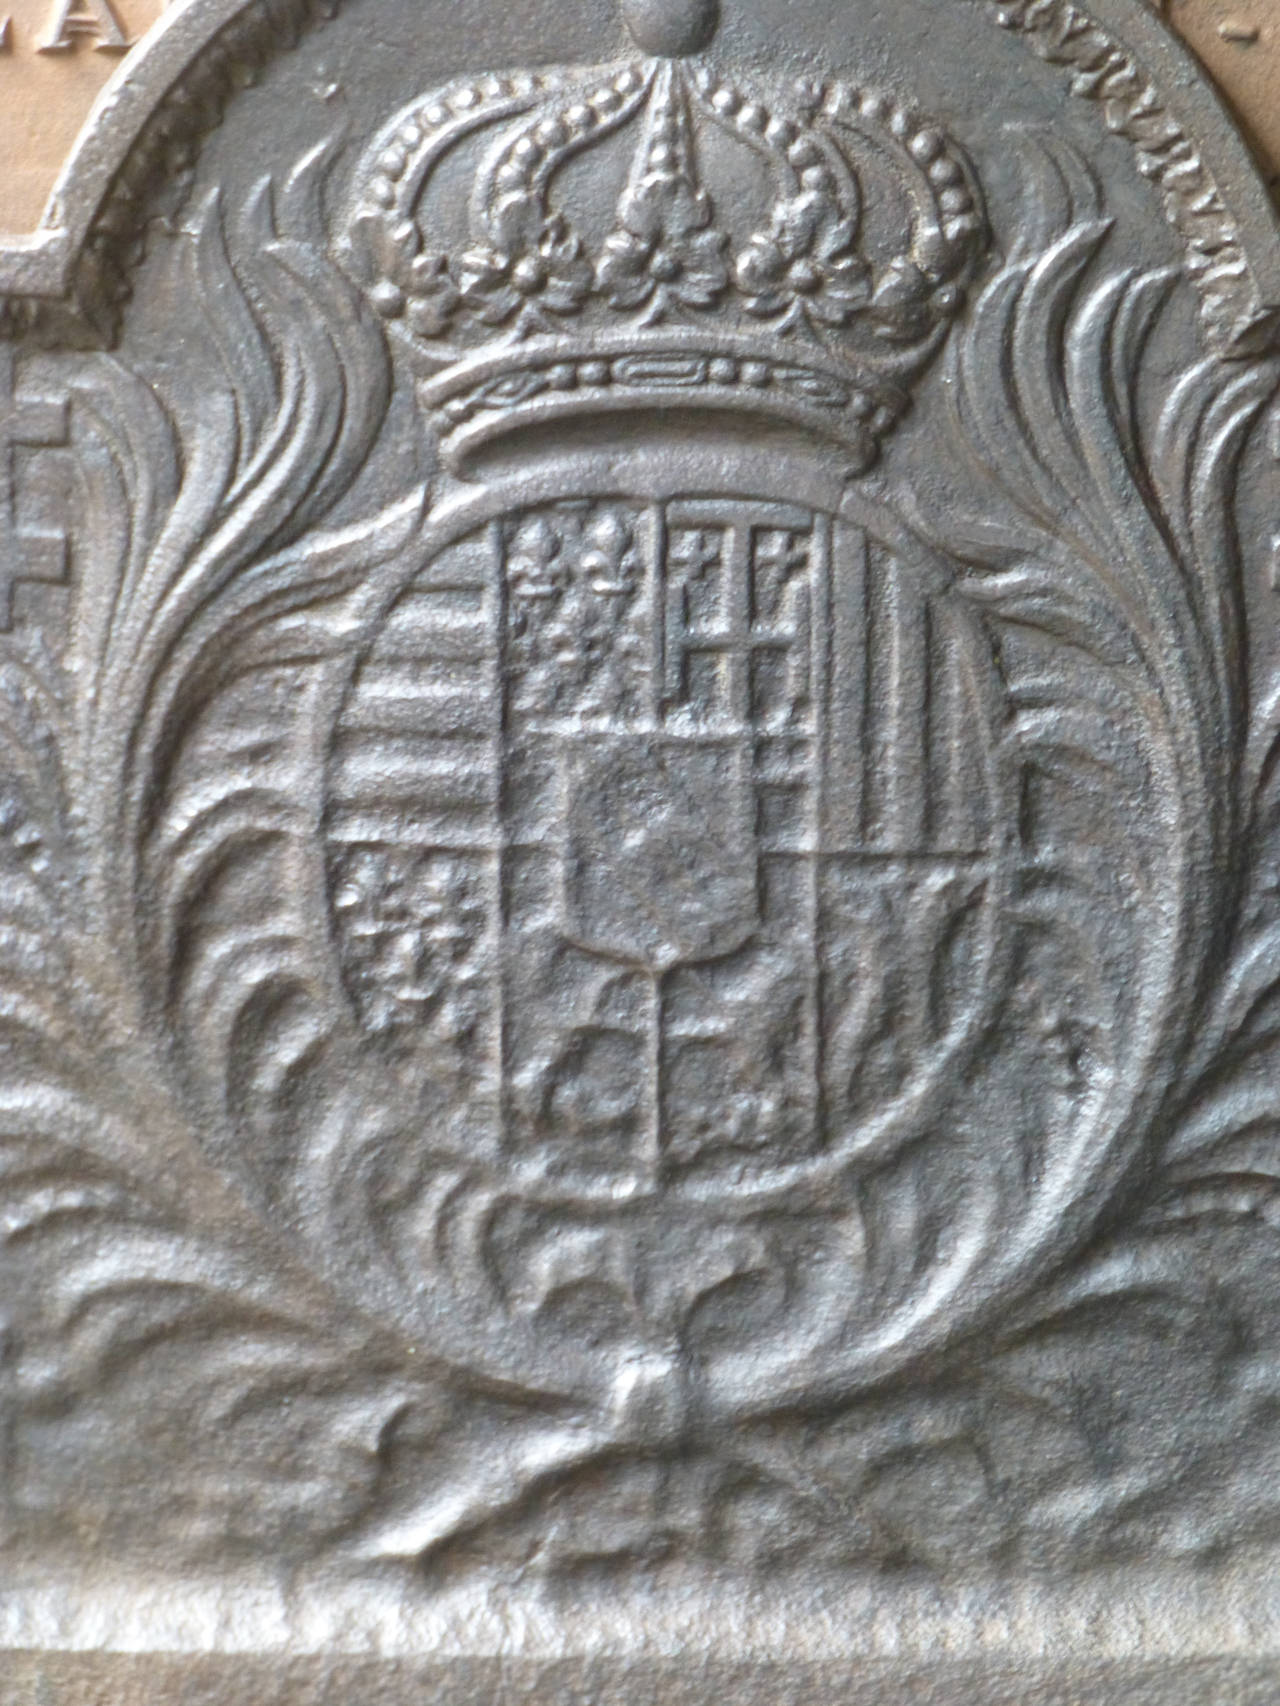 17th/18th century French fireback with the Lorraine coat of arms consisting of a half round shield with arms of Leopold I, Duke of Lorraine, and palm branches. Surrounded by a chain of the Golden Fleece. The symbol of this Order is a small golden